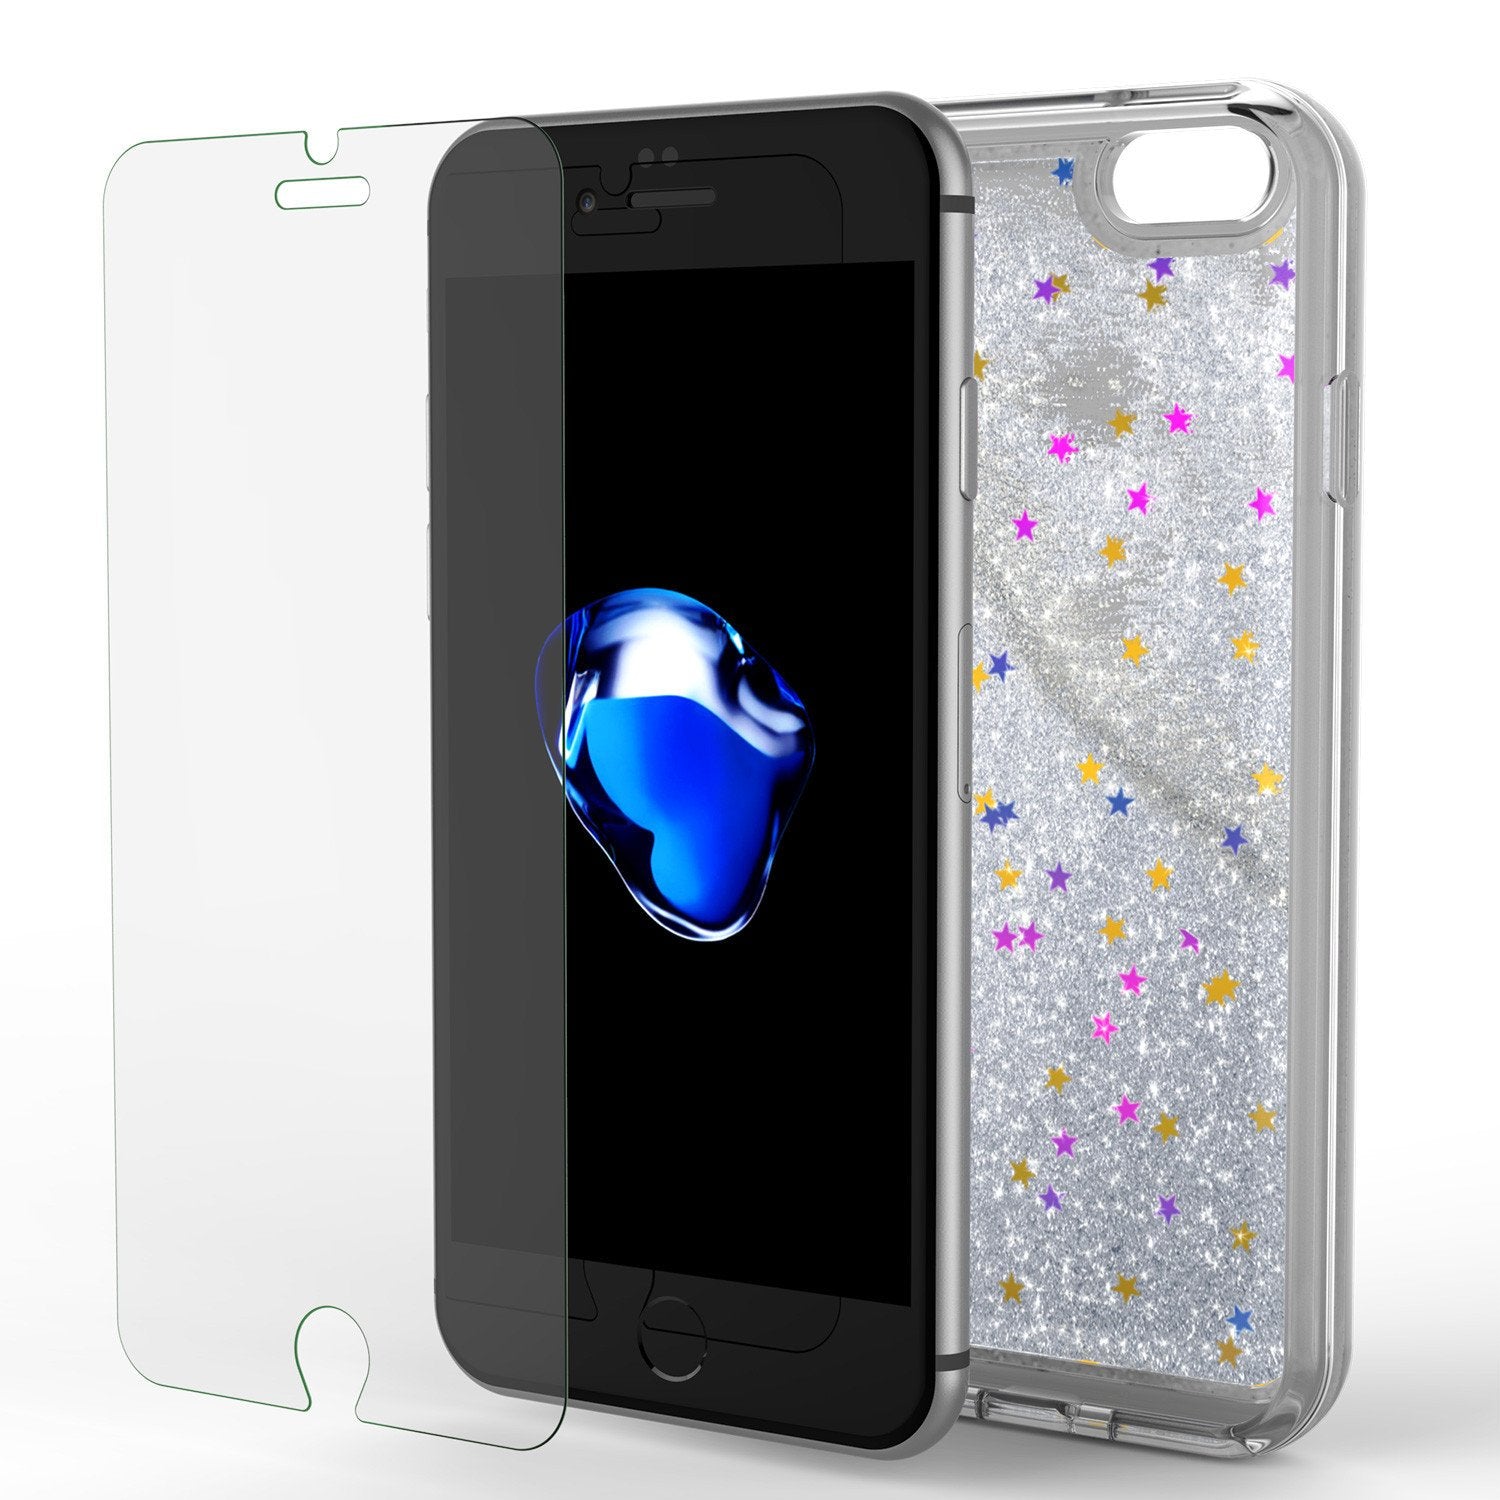 iPhone 7 Case, Punkcase [Liquid Silver Series] Protective Dual Layer Floating Glitter Cover with lots of Bling & Sparkle + 0.3mm Tempered Glass Screen Protector for Apple iPhone 7s